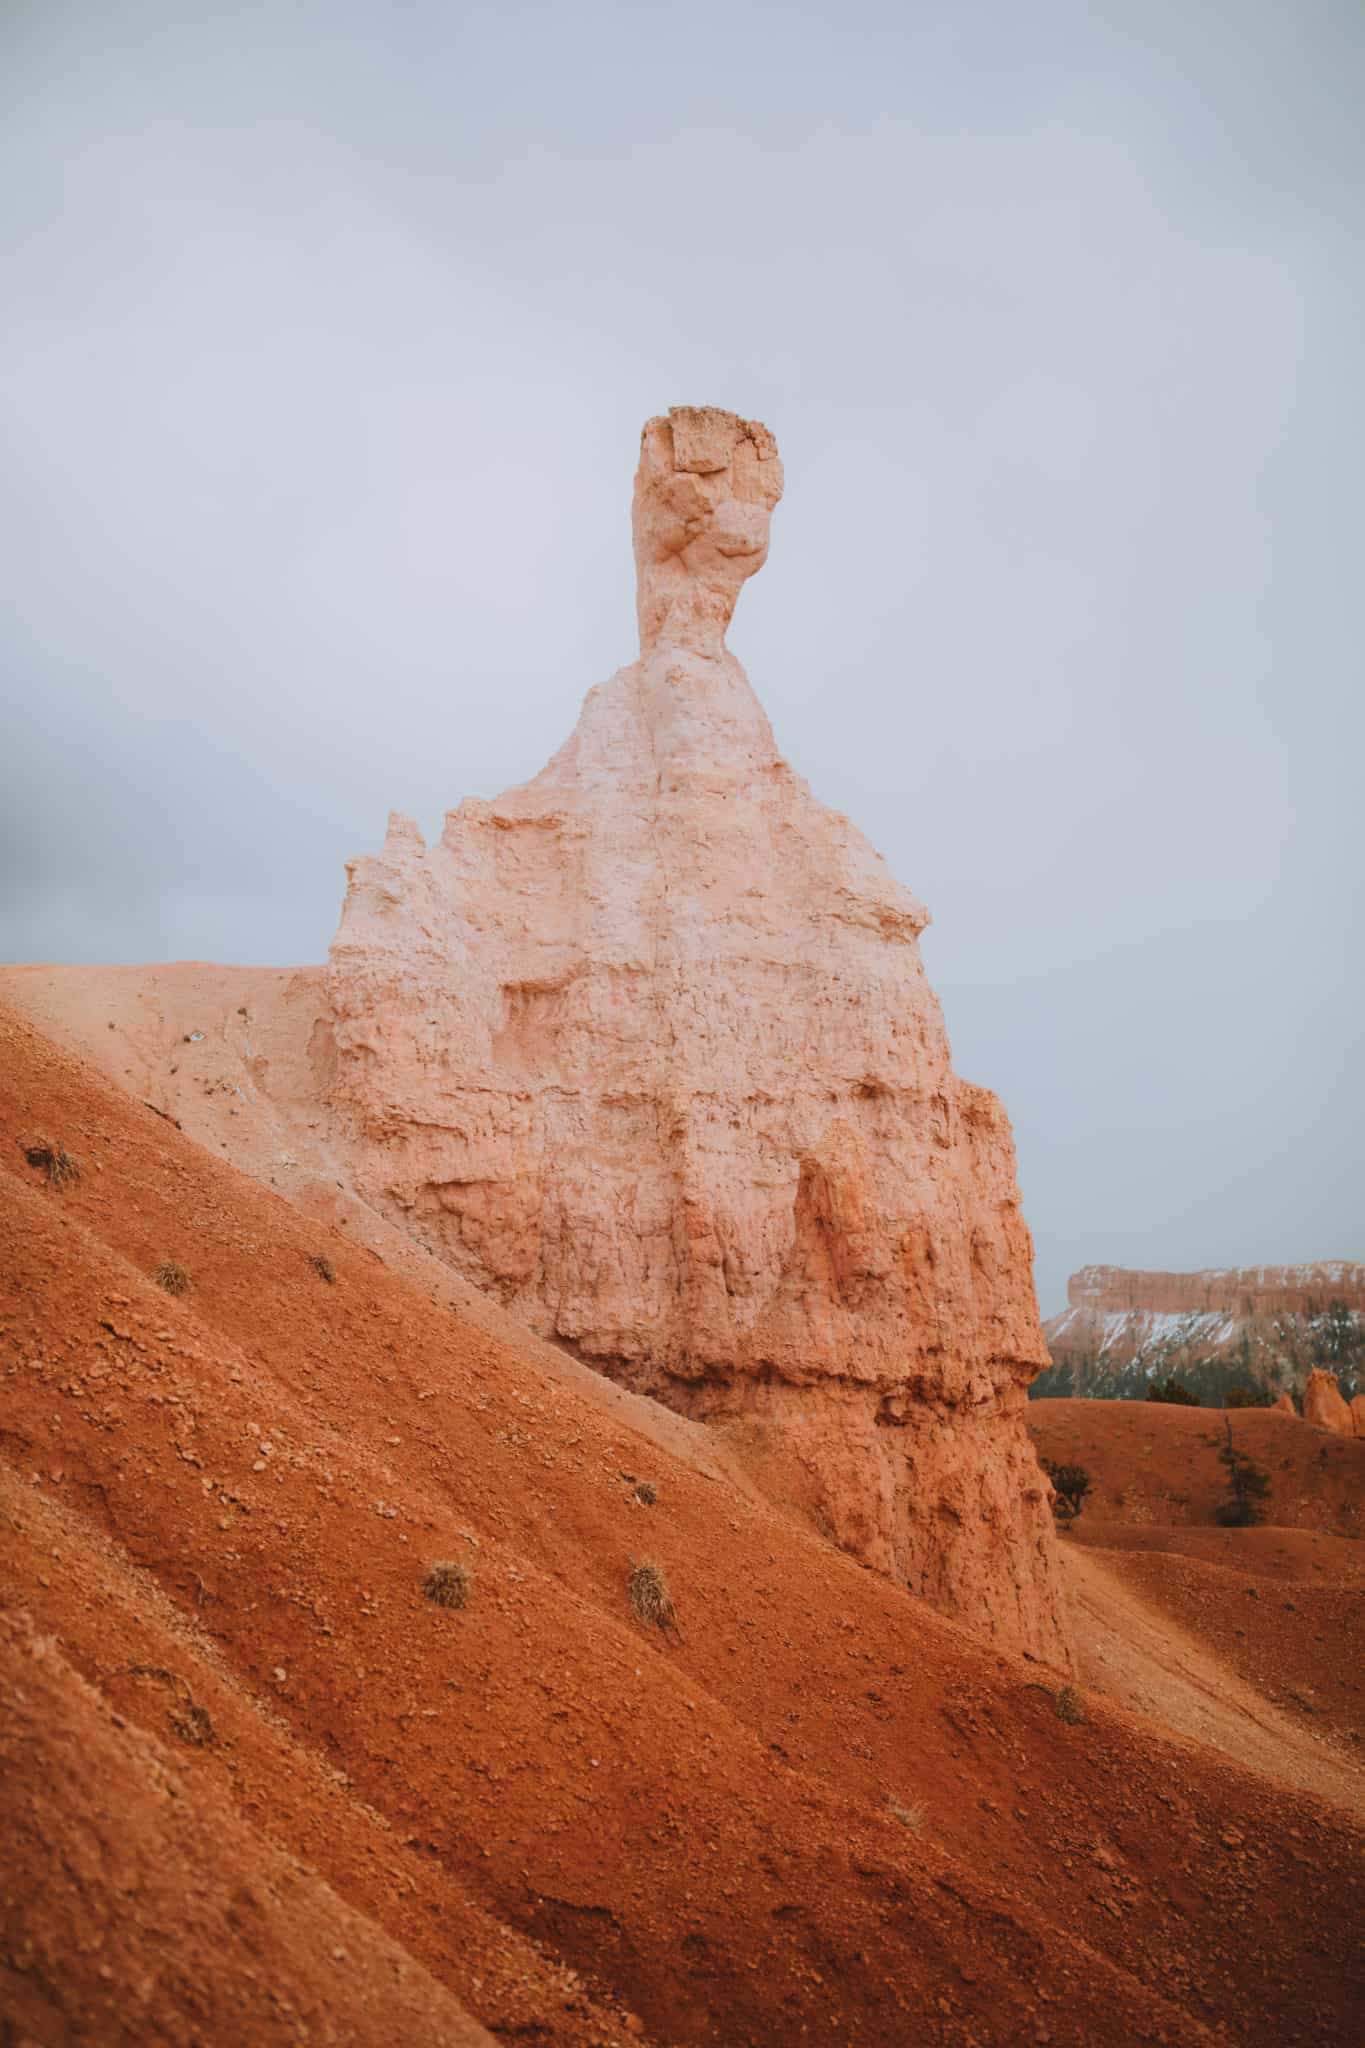 American Southwest road trip stops - Bryce Canyon